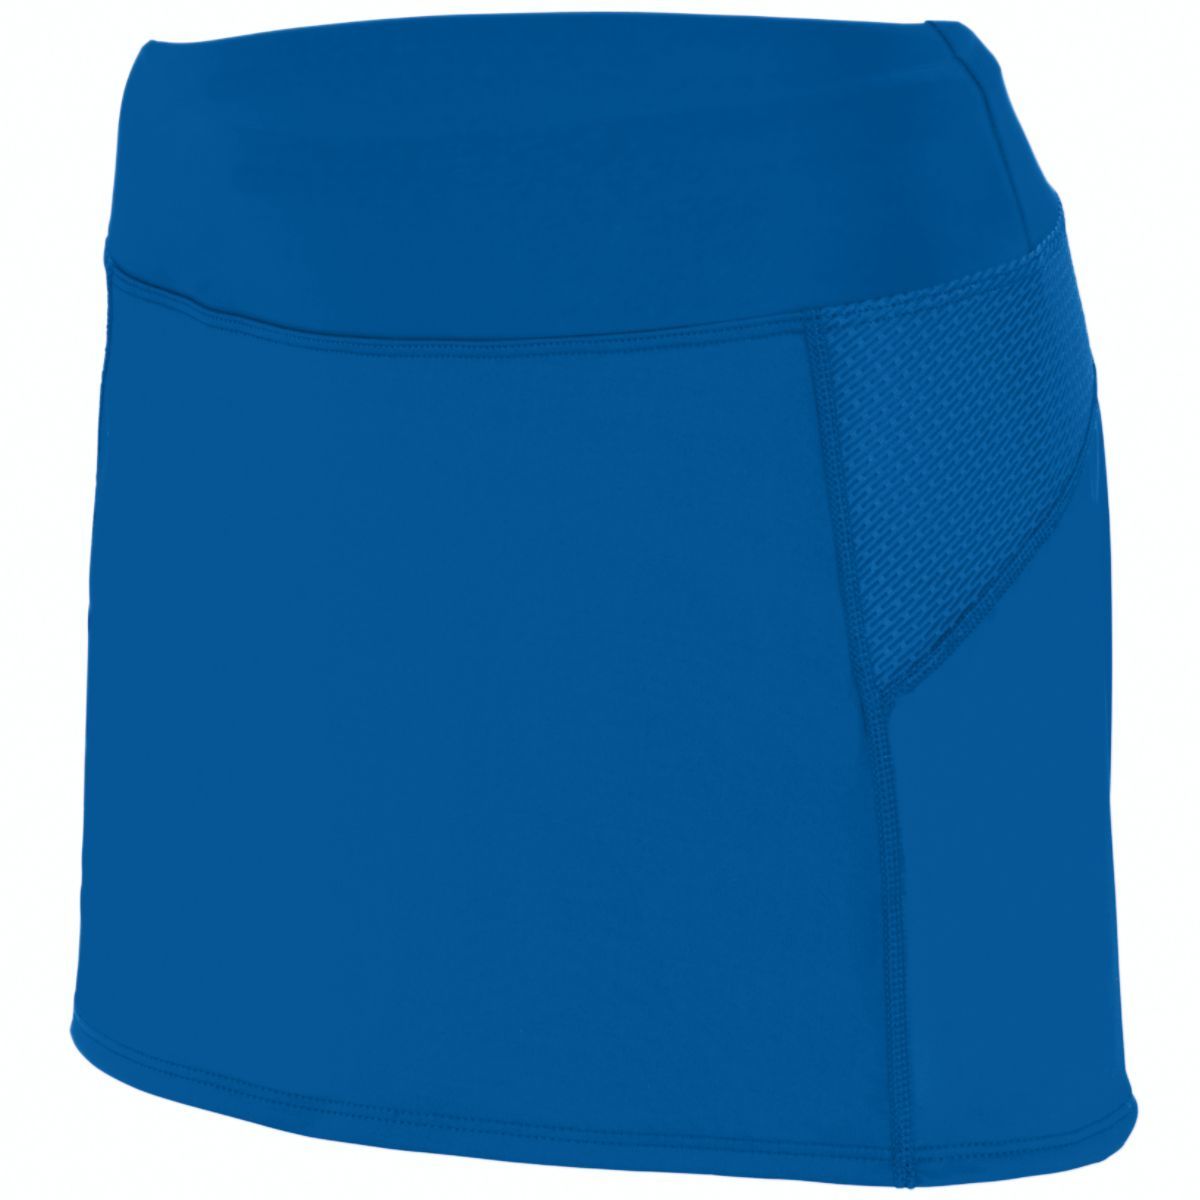 Augusta Sportswear Ladies Femfit Skort in Royal/Graphite  -Part of the Ladies, Augusta-Products product lines at KanaleyCreations.com